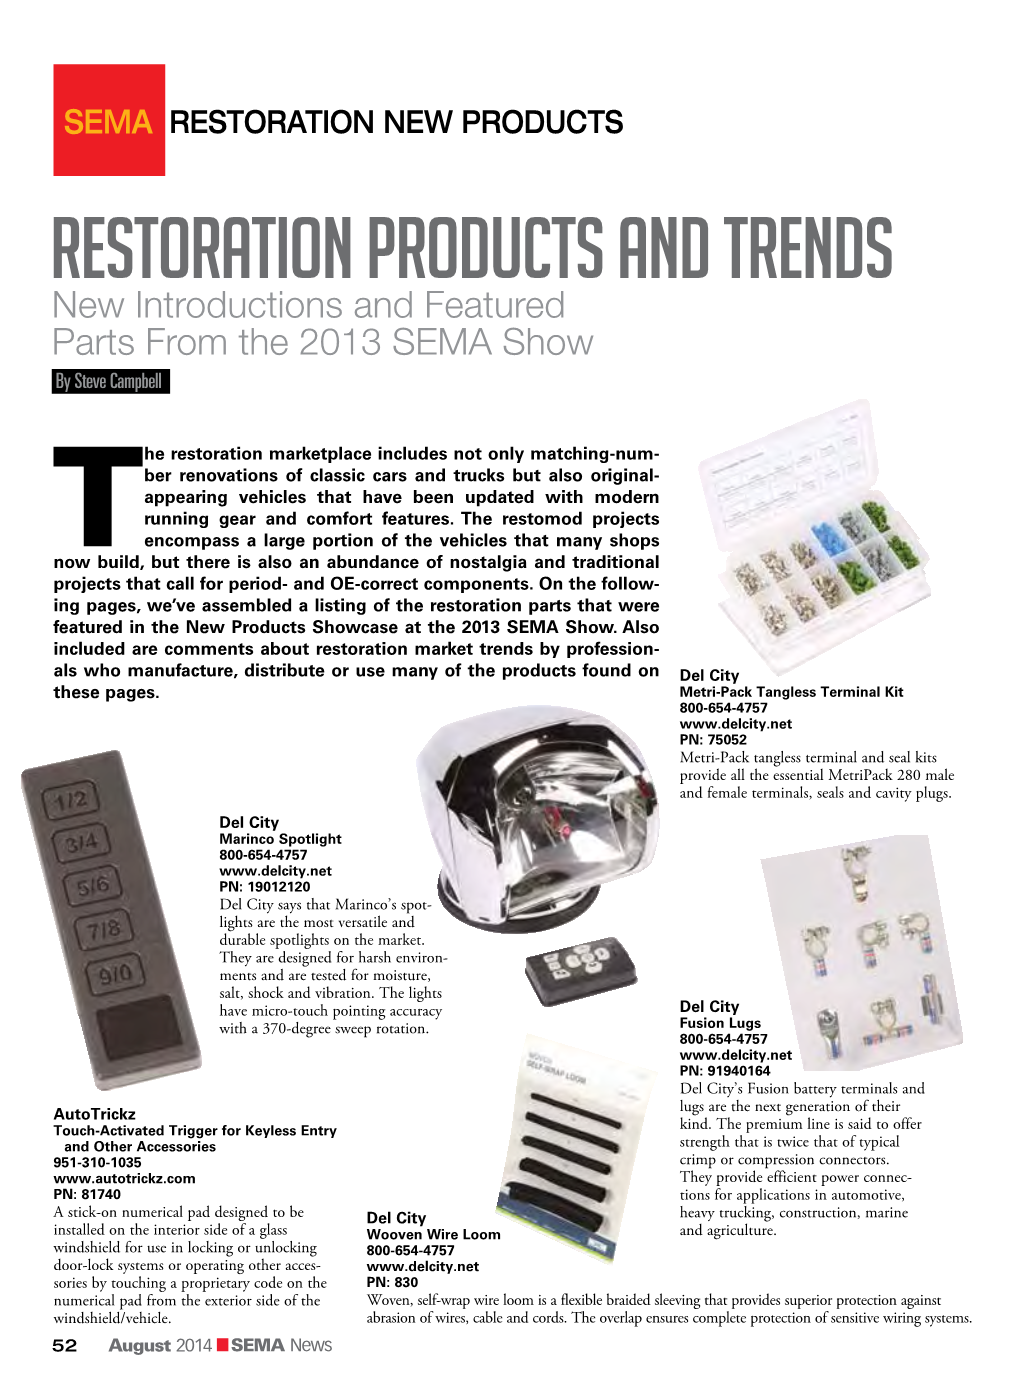 SEMA RESTORATION NEW PRODUCTS Restoration Products and Trends New Introductions and Featured Parts from the 2013 SEMA Show by Steve Campbell